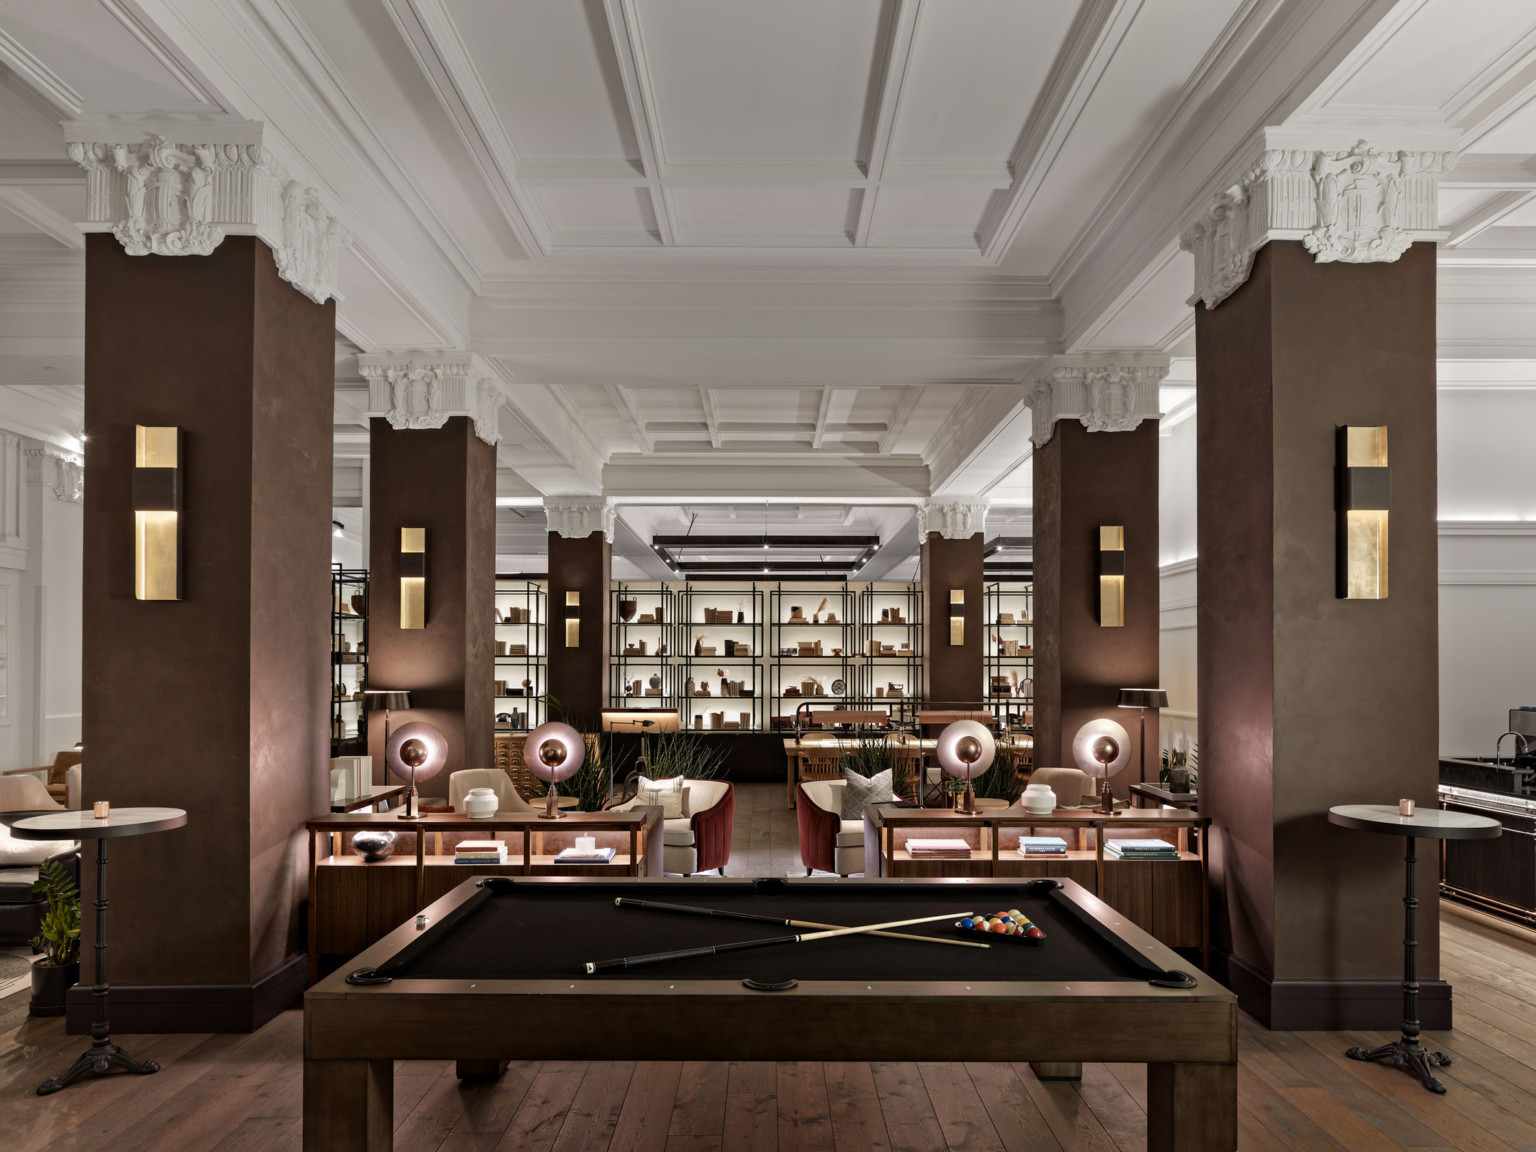 he Surety Hotel with billiard tables and wood pillars and white Corinthian capitals in room with recessed ceiling details